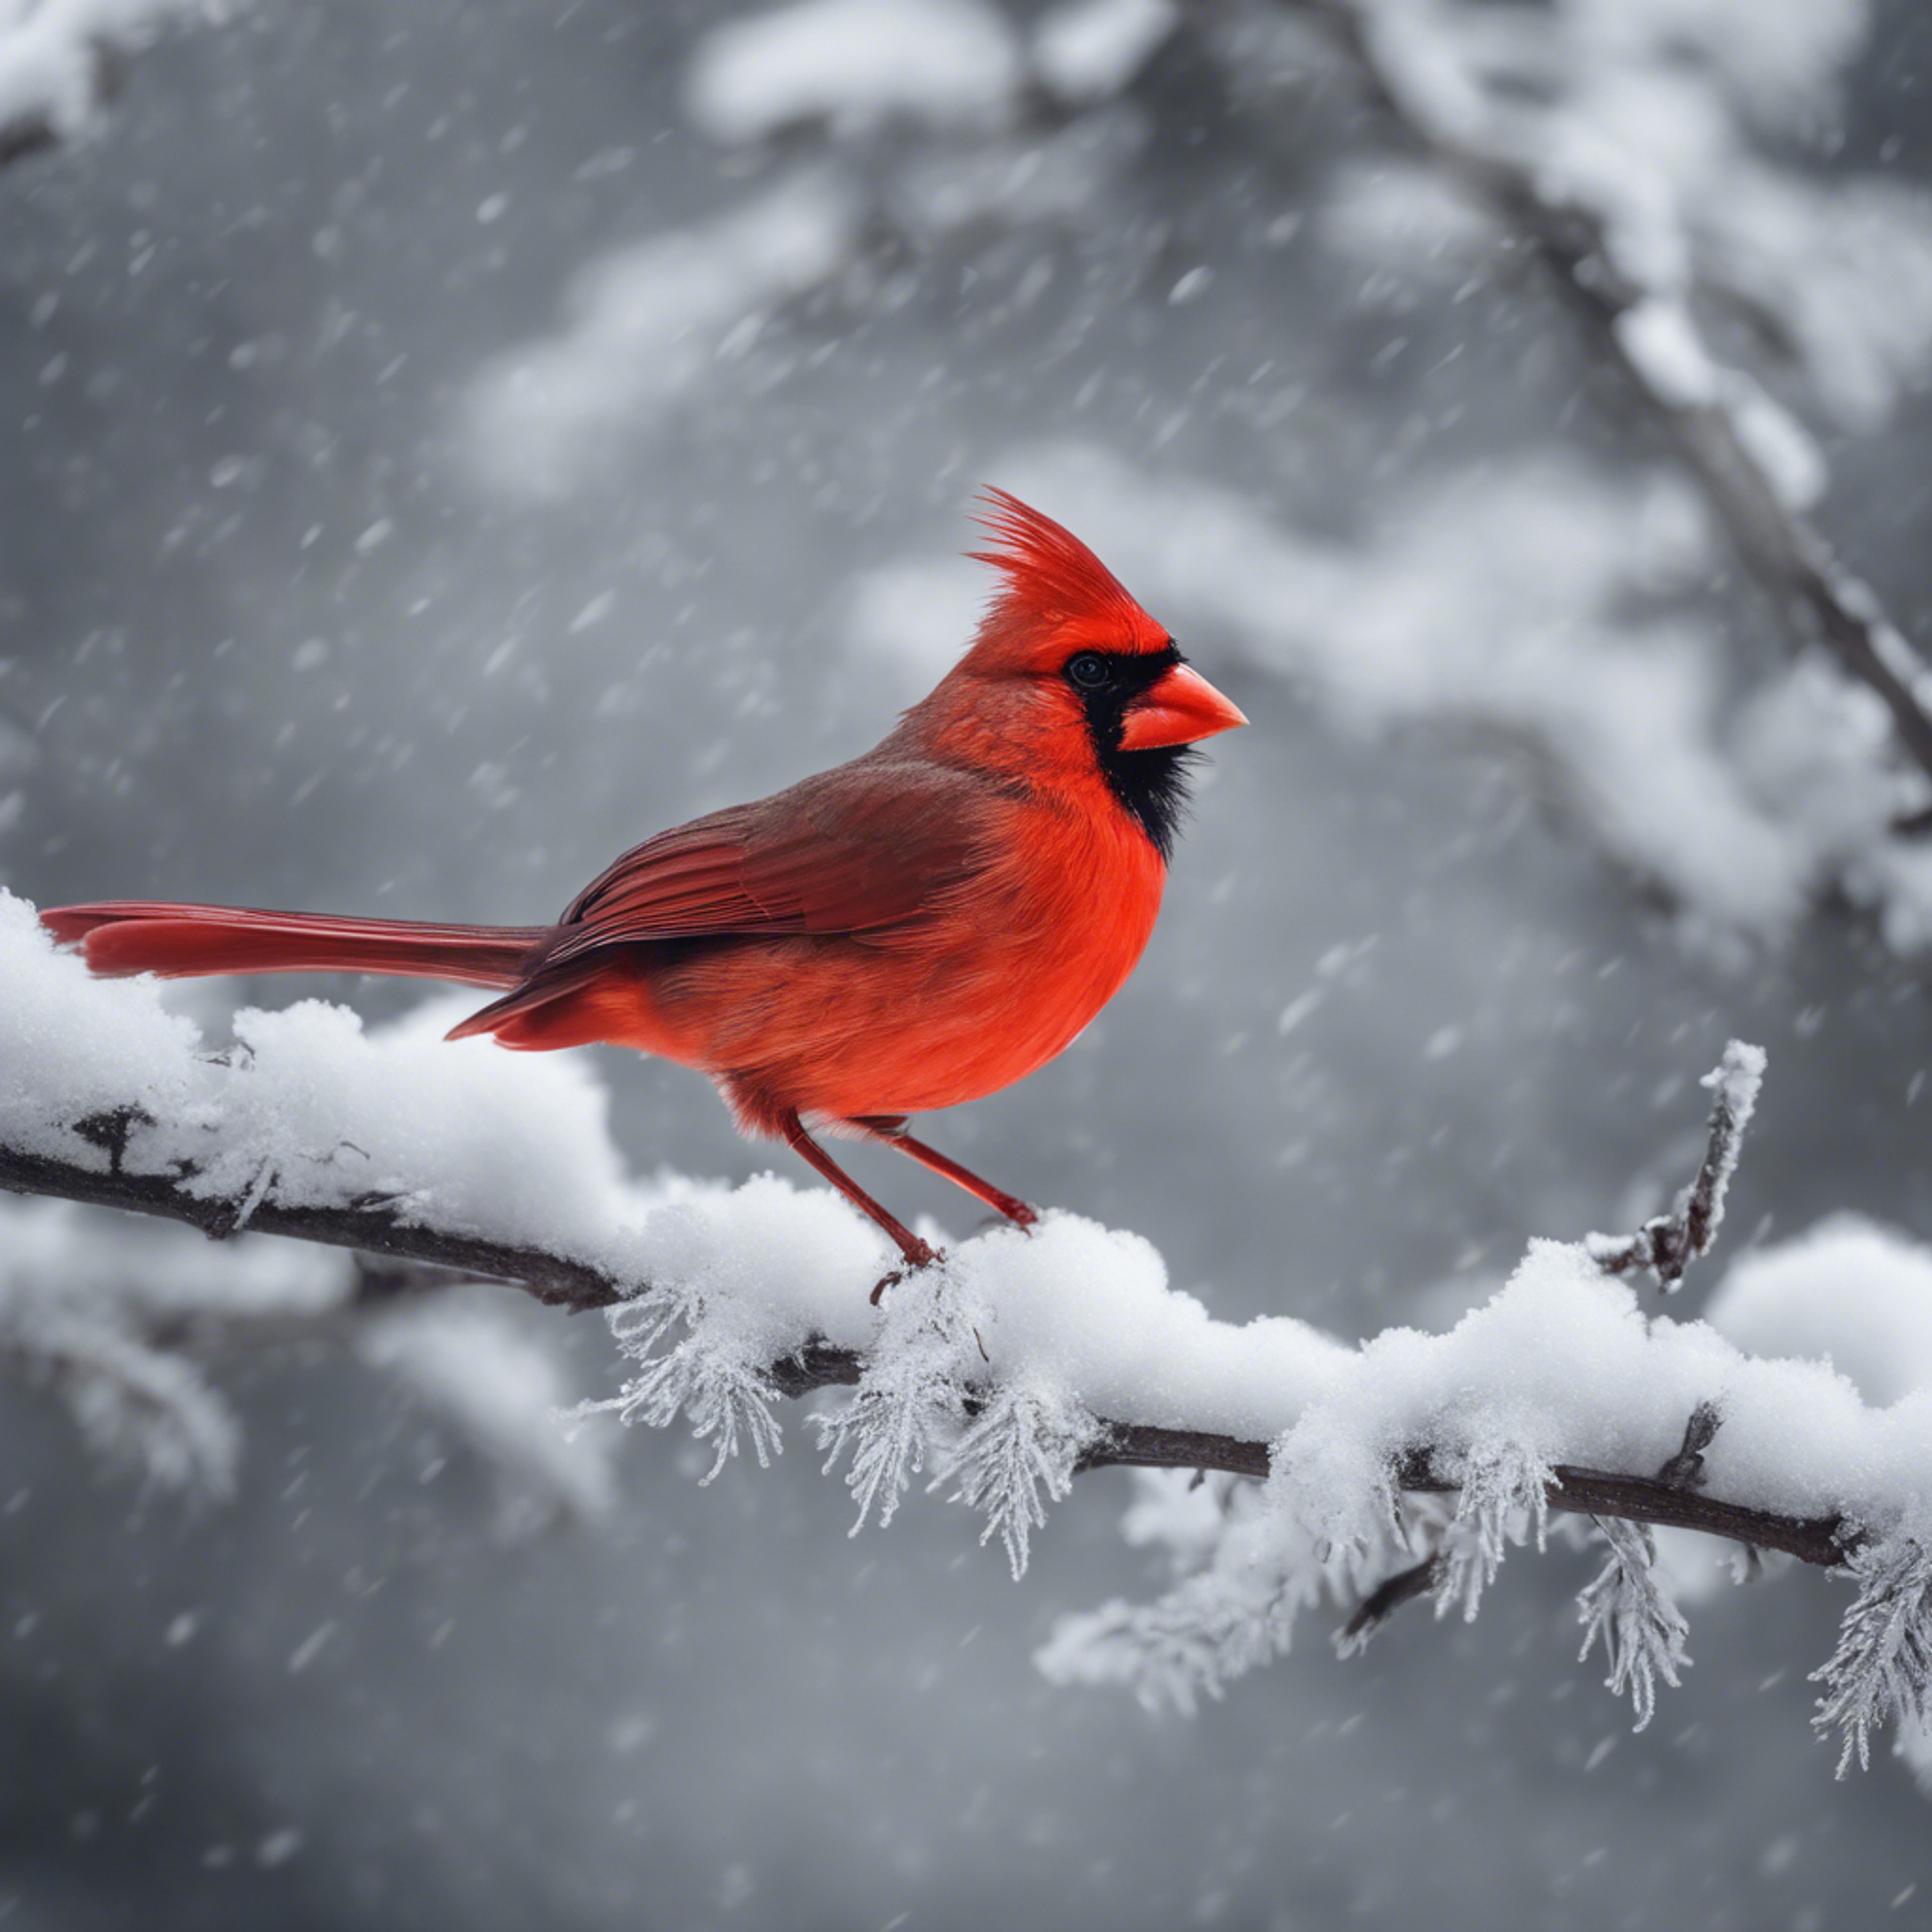 A red cardinal perched on a frosted, snow-laden branch, adding a pop of color to the otherwise monochrome winter scene. Wallpaper[df66bf895dd24dce8367]